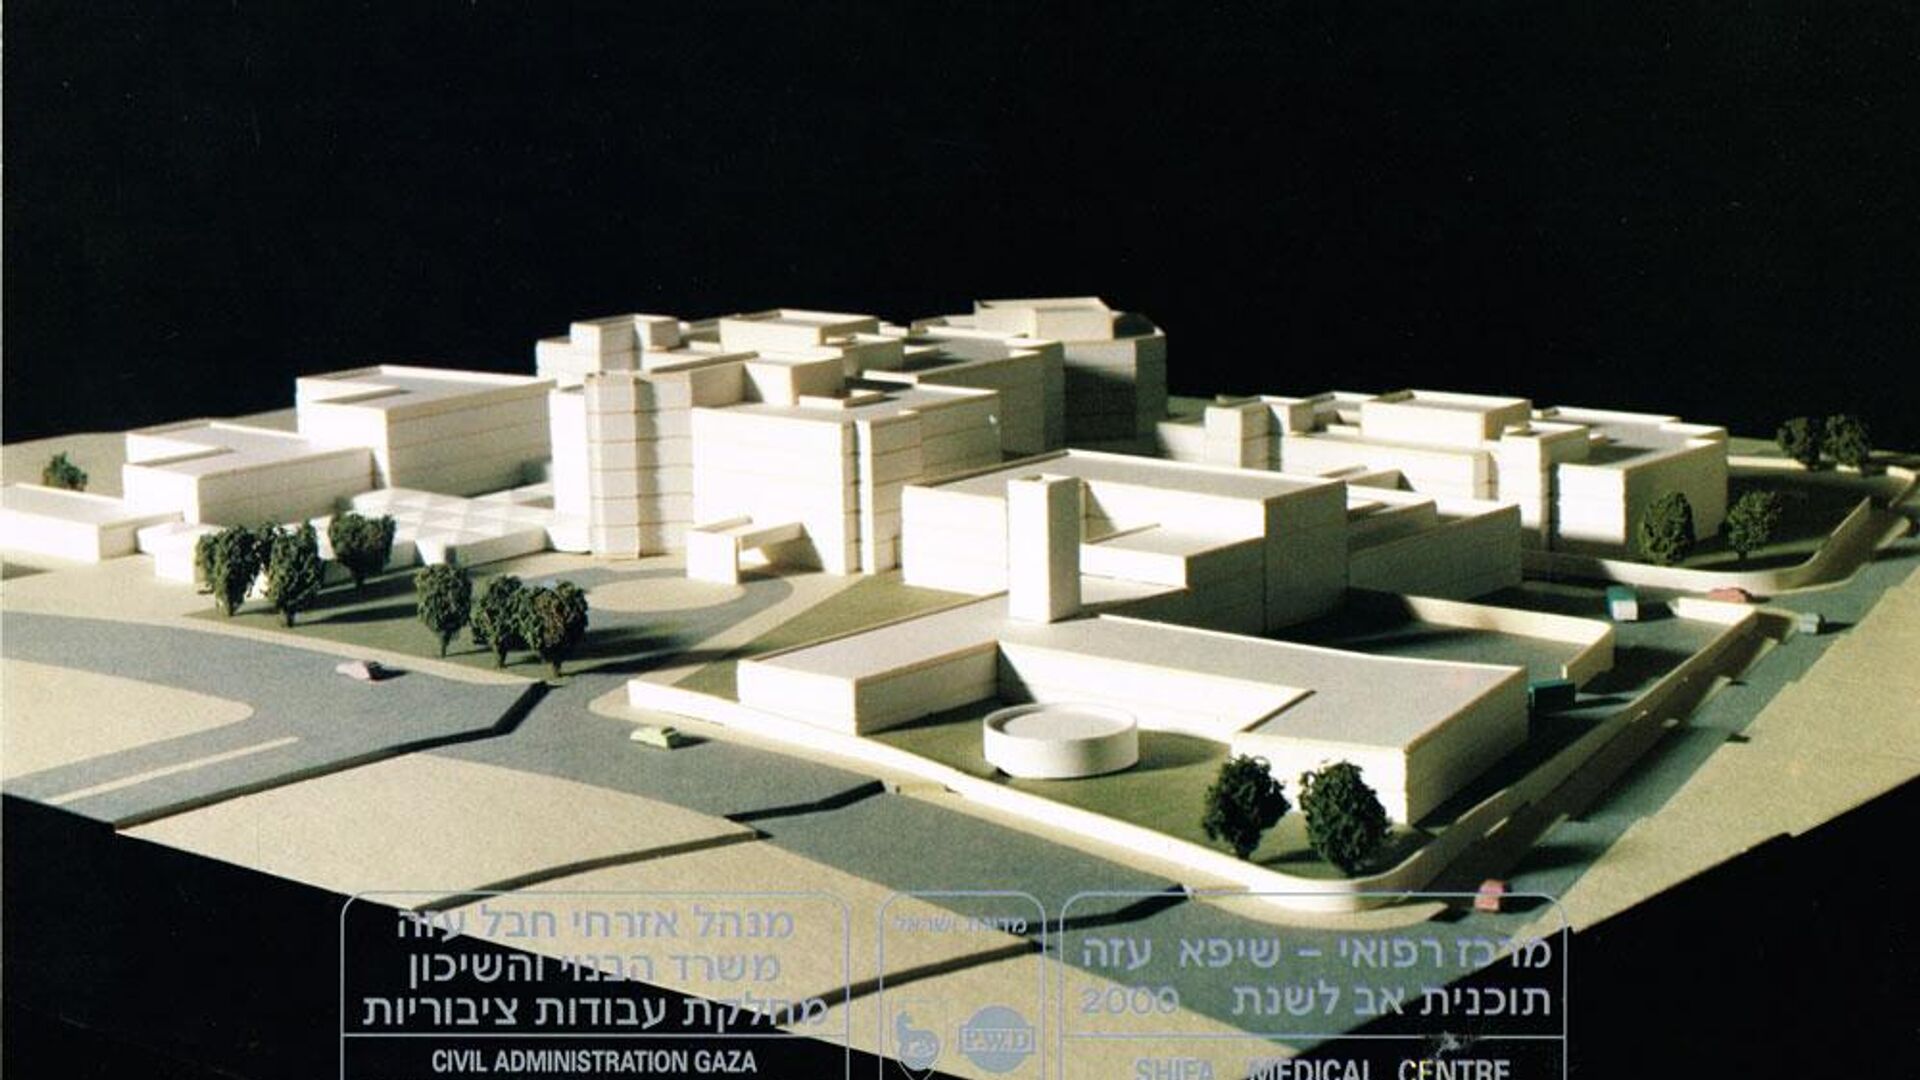 The Shifa Medical Center Master Plan for the year 2000 developed by Israeli architects in the 1970s and 80s. - Sputnik International, 1920, 15.11.2023